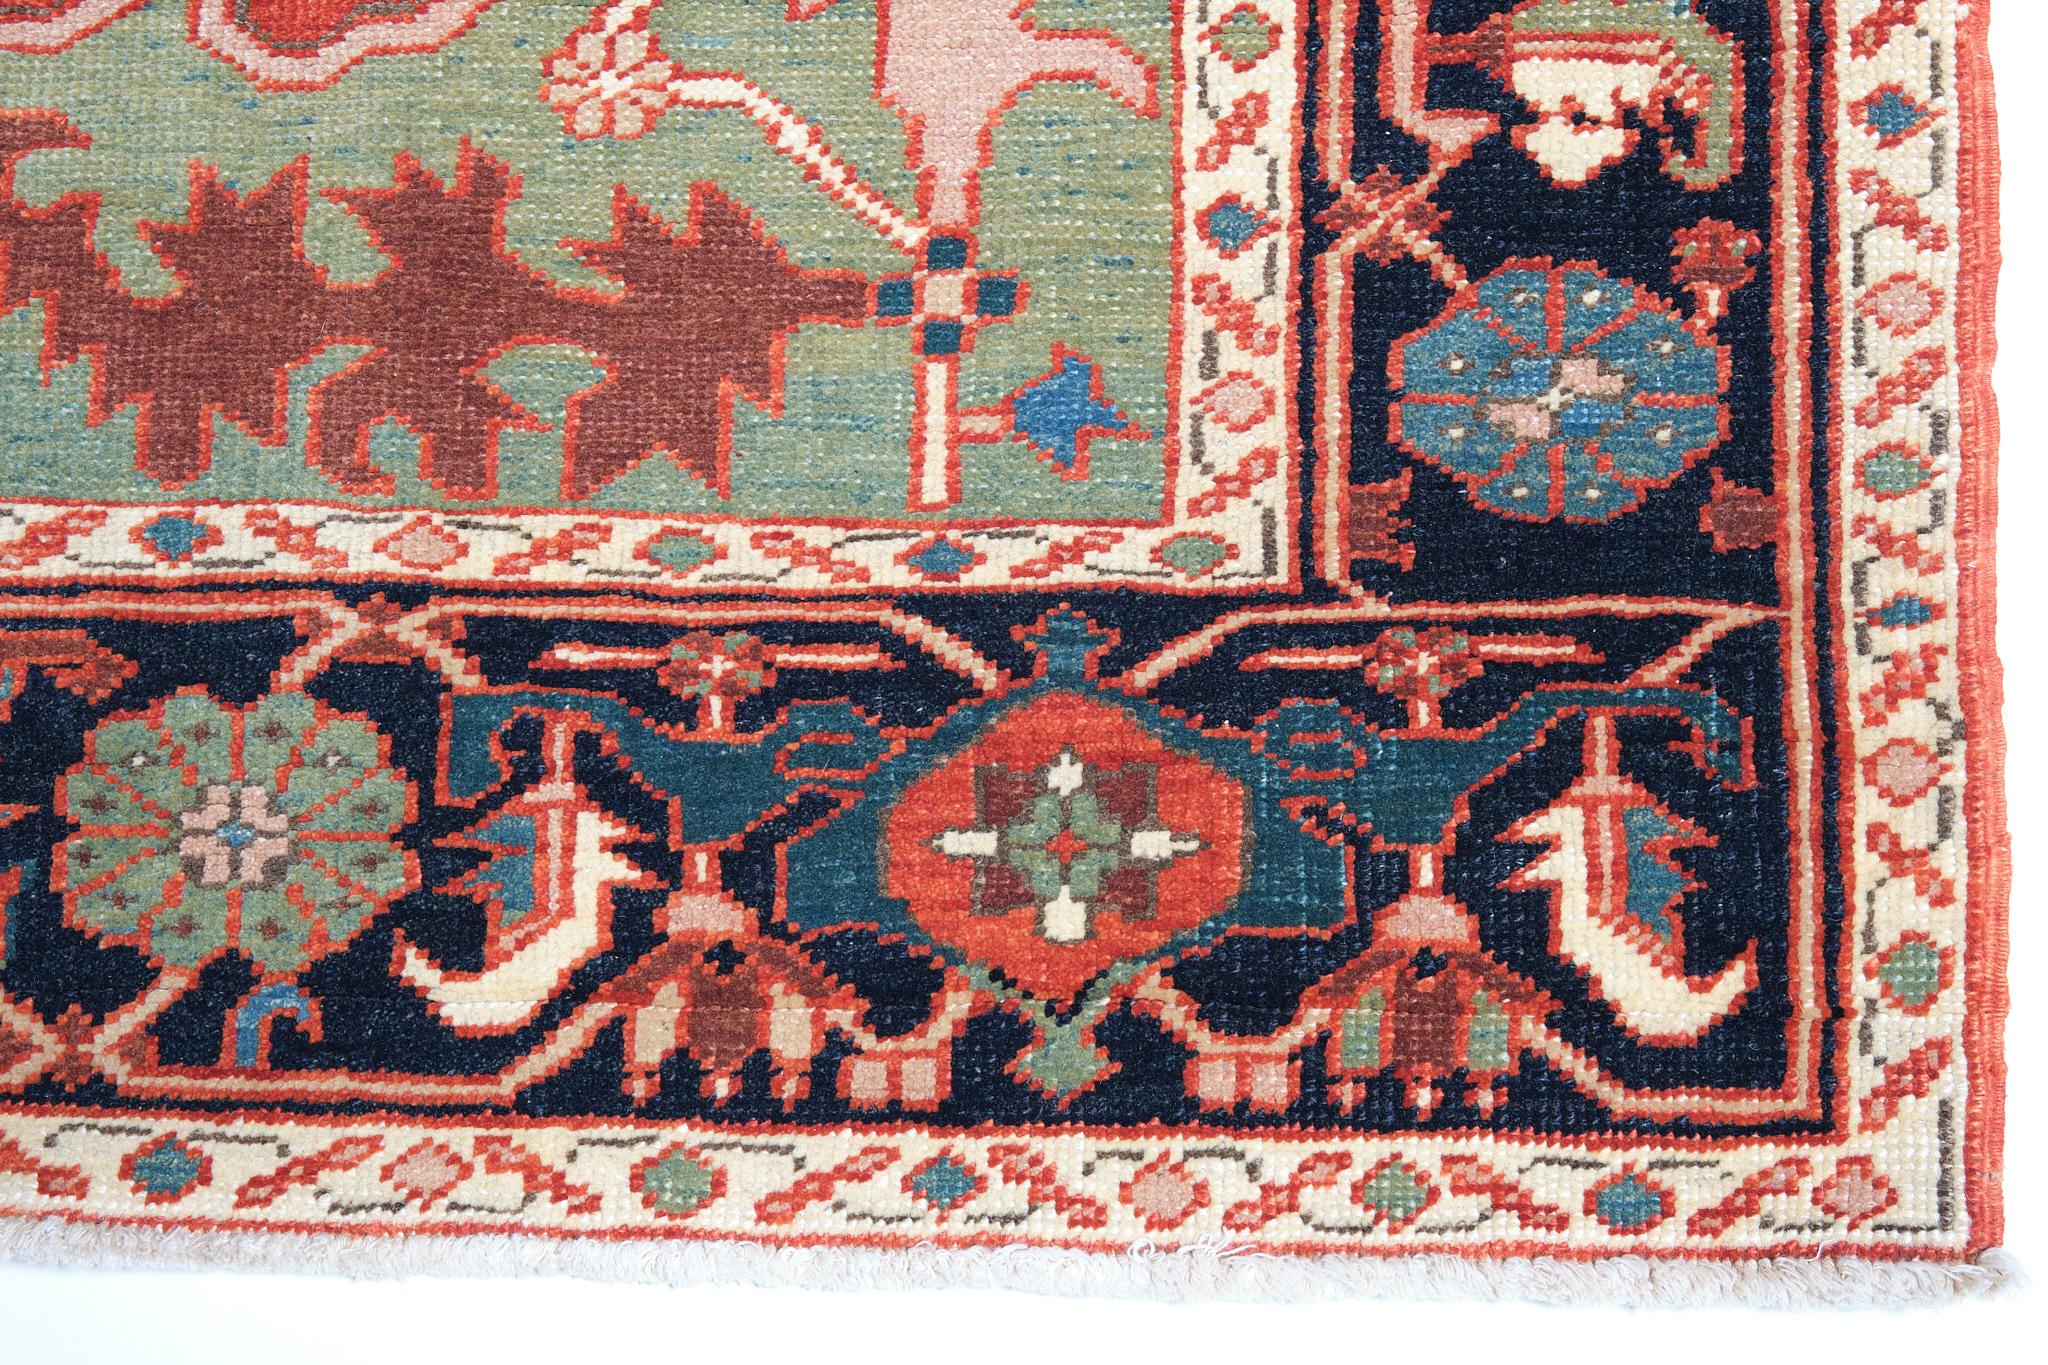 This is a medallion design rug from the late 19th century, Heriz region, Northwest Persia area. Heriz ( Heris ) is a special Turkish knot weaving area of Persia, including many villages, located east of Tabriz in northwest Persia. Weaving has been